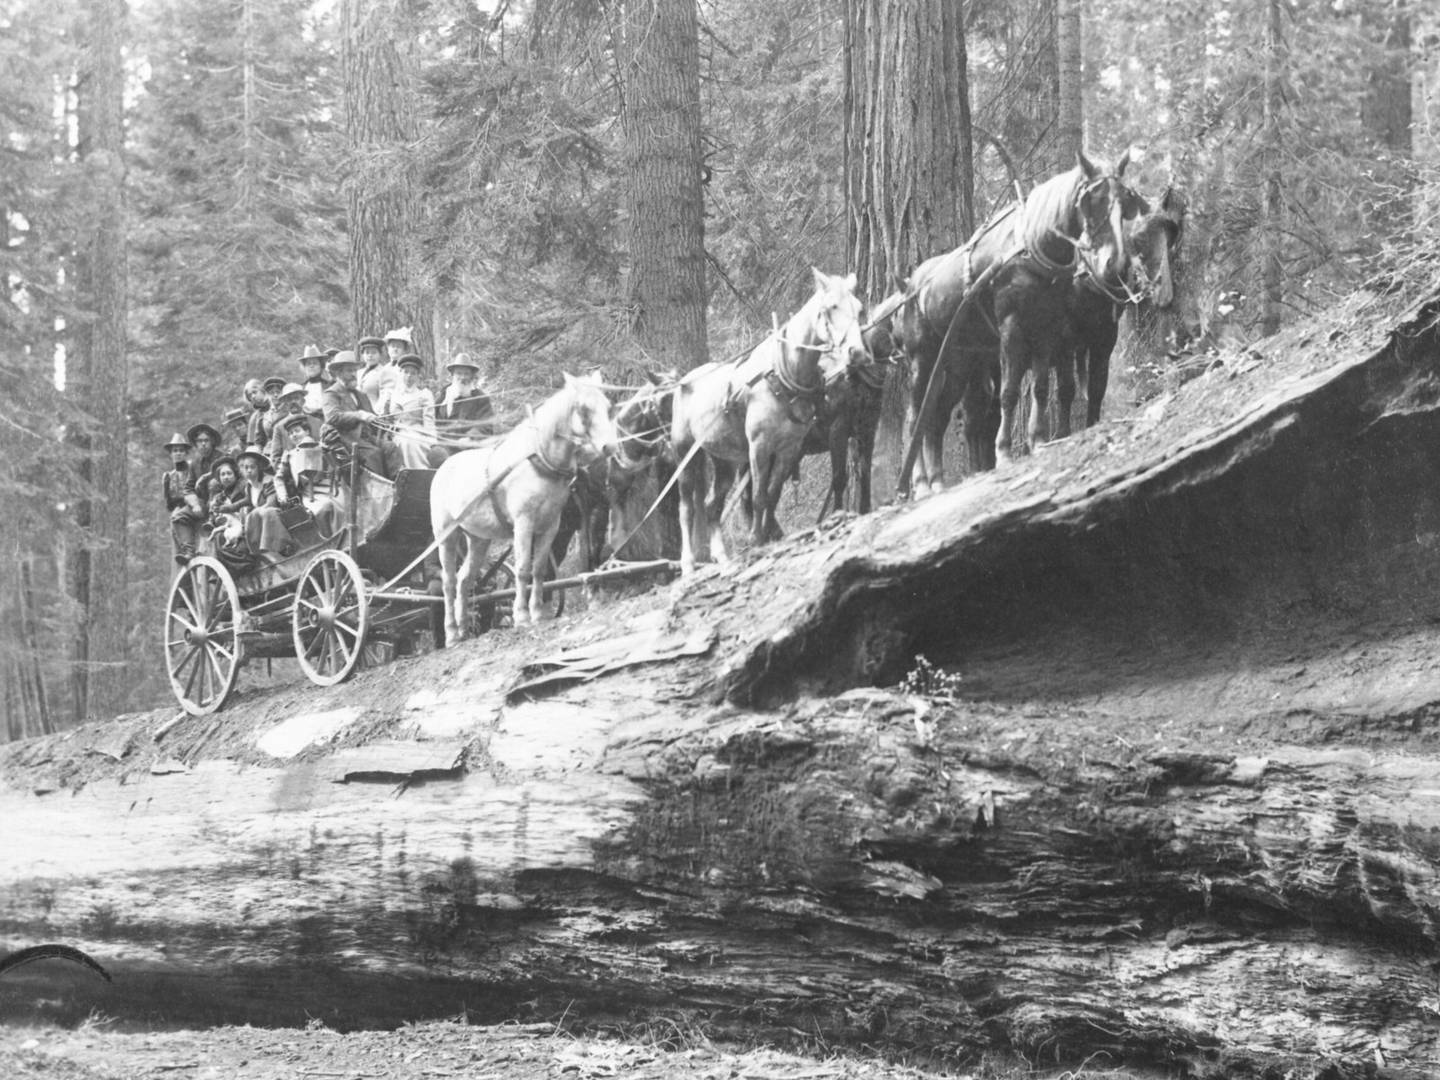 Showing the scale of a sequioa tree, a carriage and six horses stand on the fallen Monarch tree, in this undated photograph taken at Yosemite National Park. Photo: National Parks Service